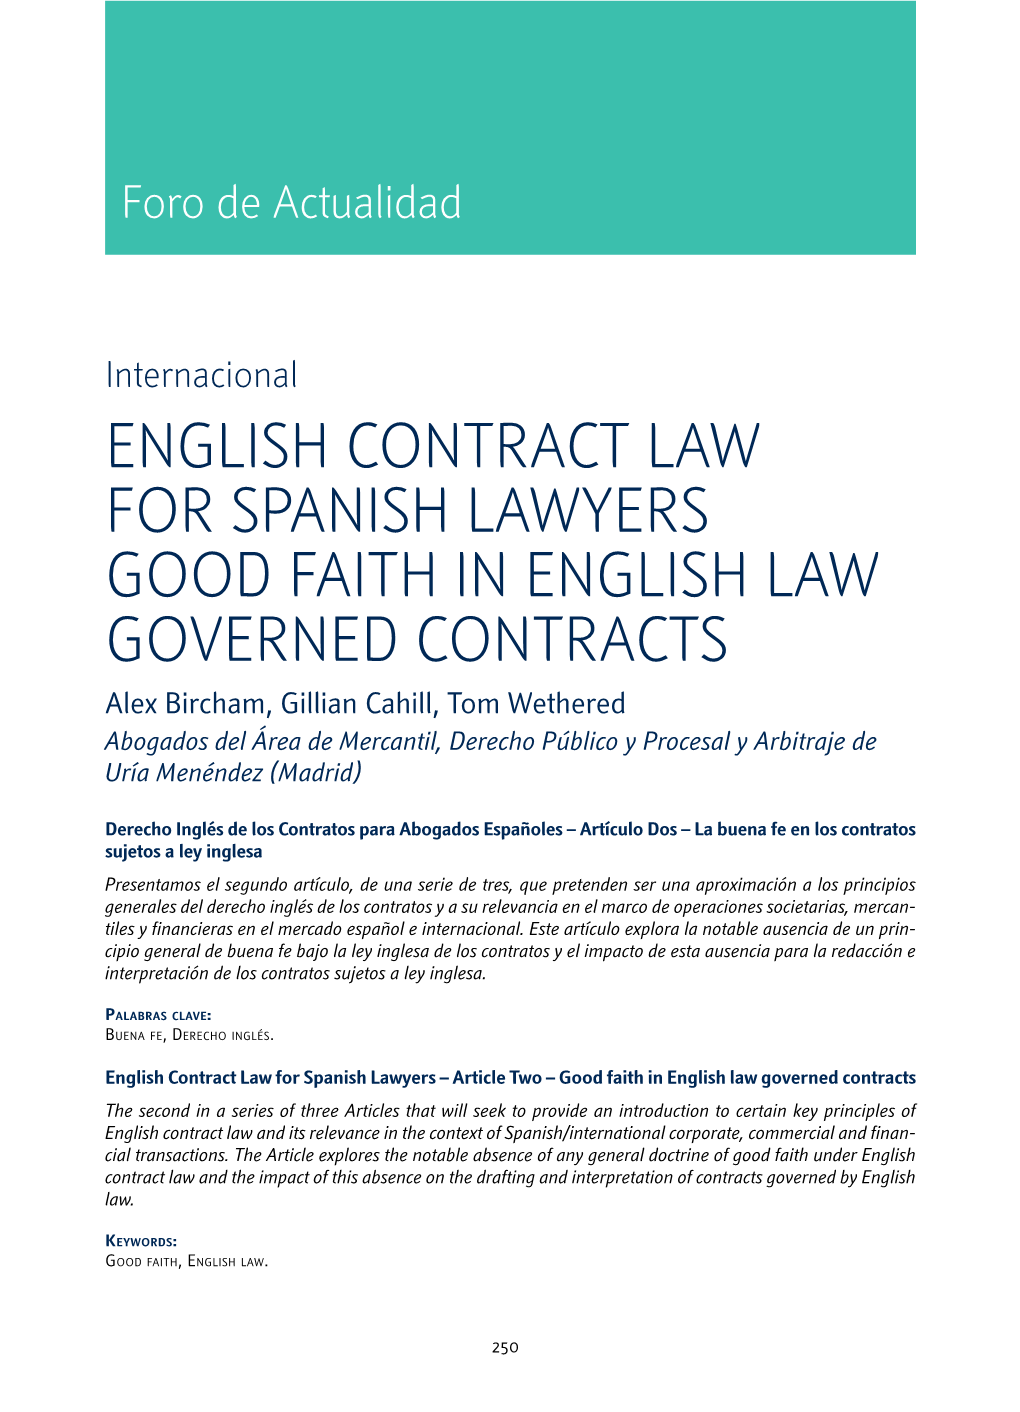 English Contract Law for Spanish Lawyers Good Faith